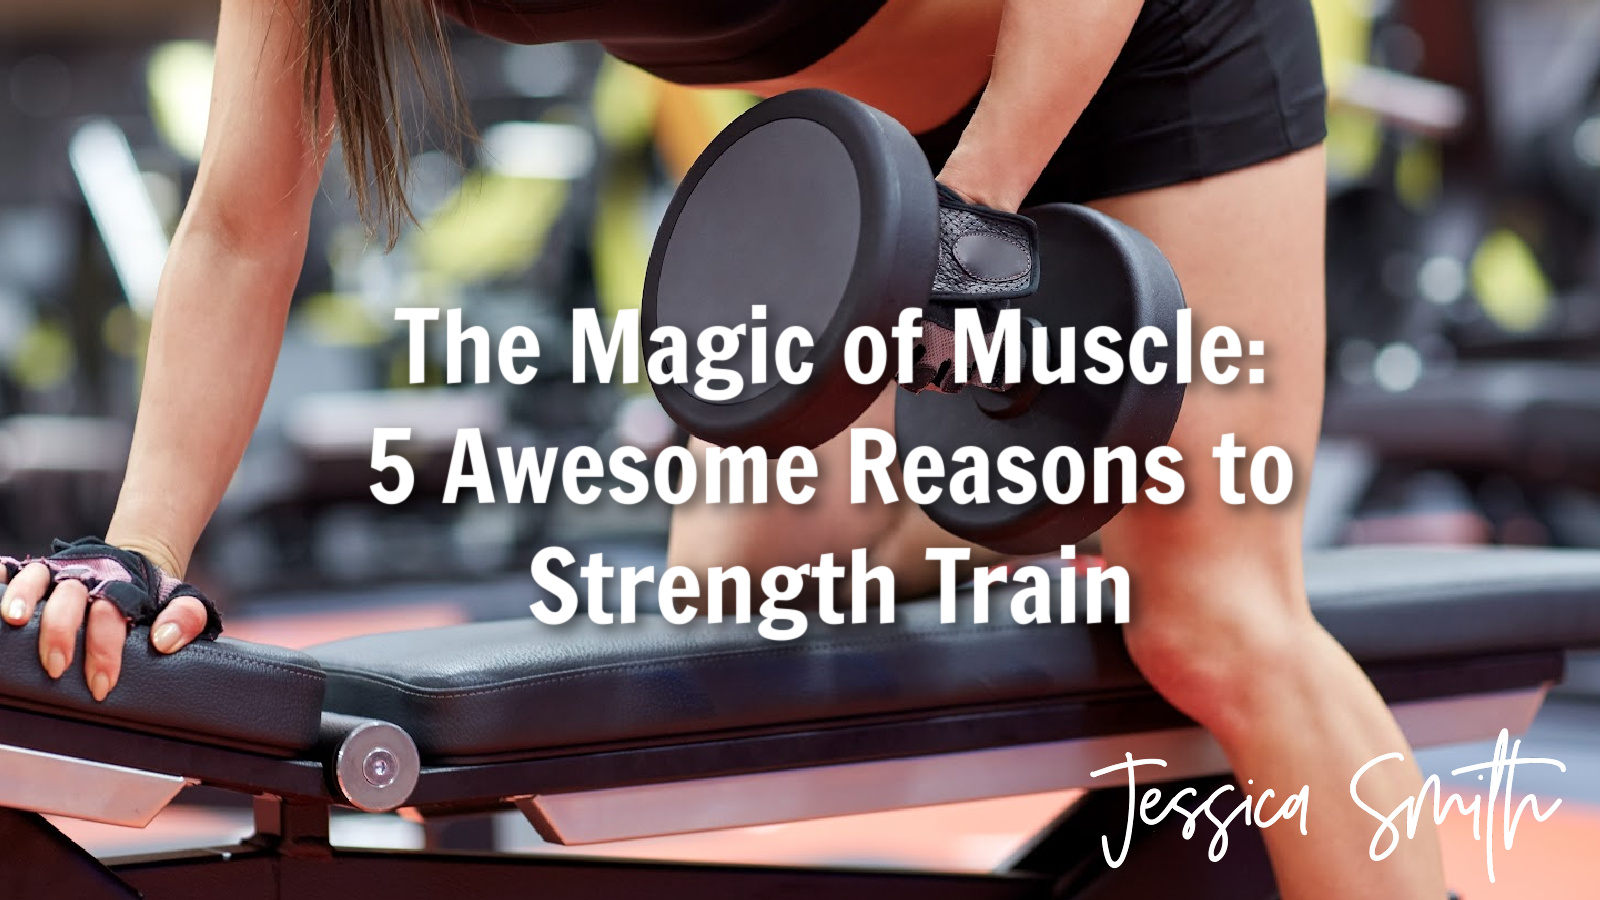 The Magic of Muscle: 5 Awesome Reasons to Strength Train